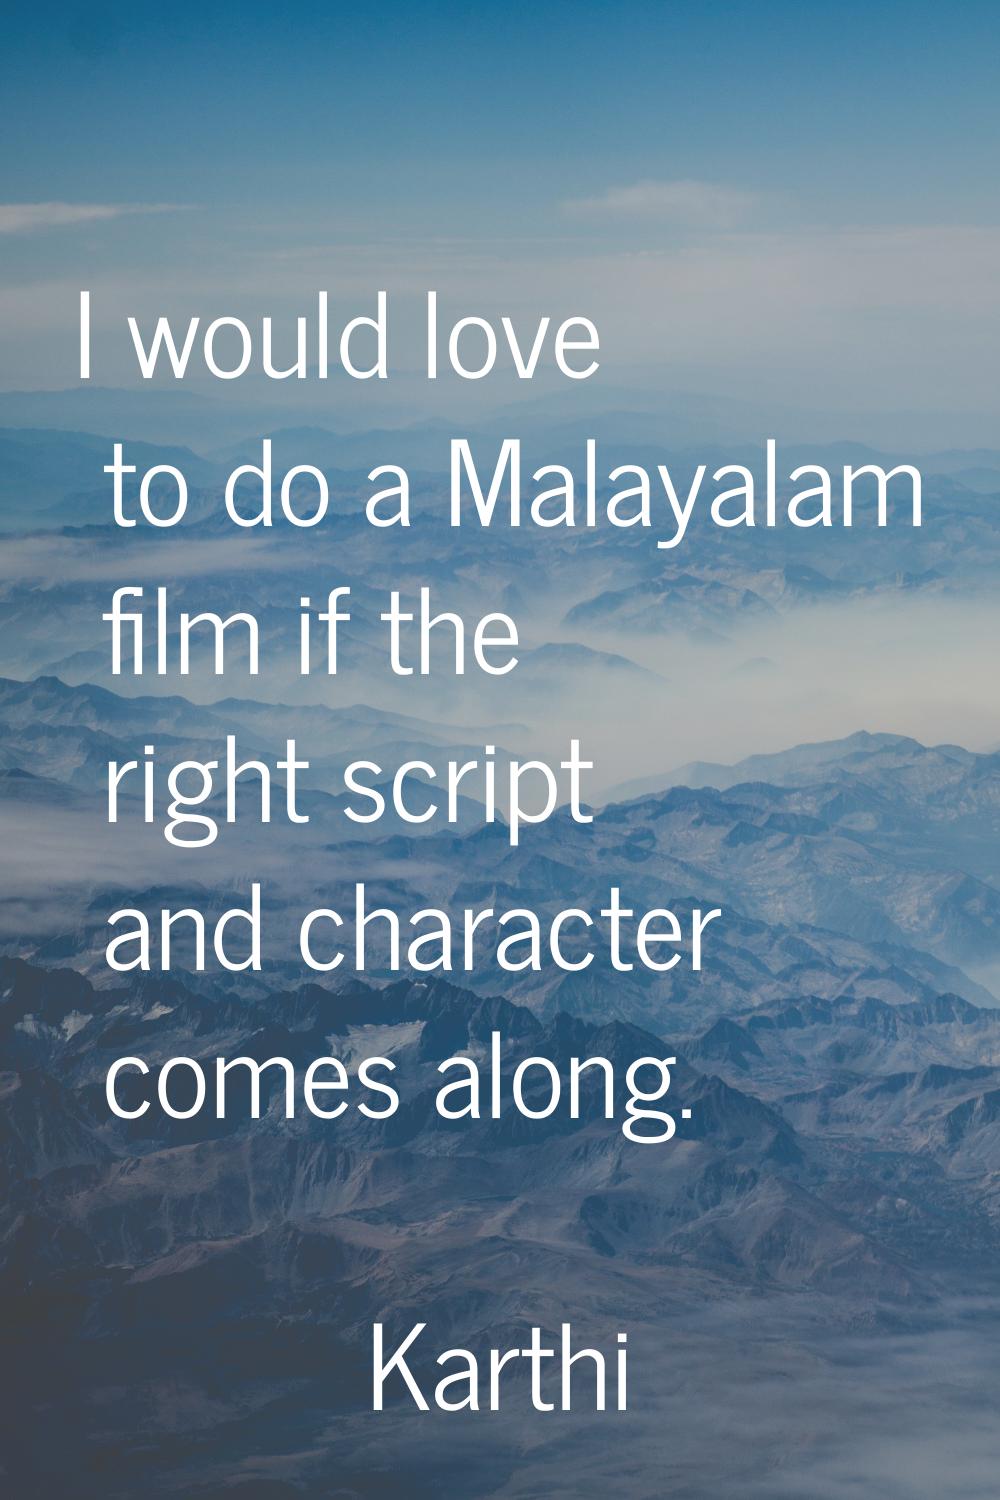 I would love to do a Malayalam film if the right script and character comes along.